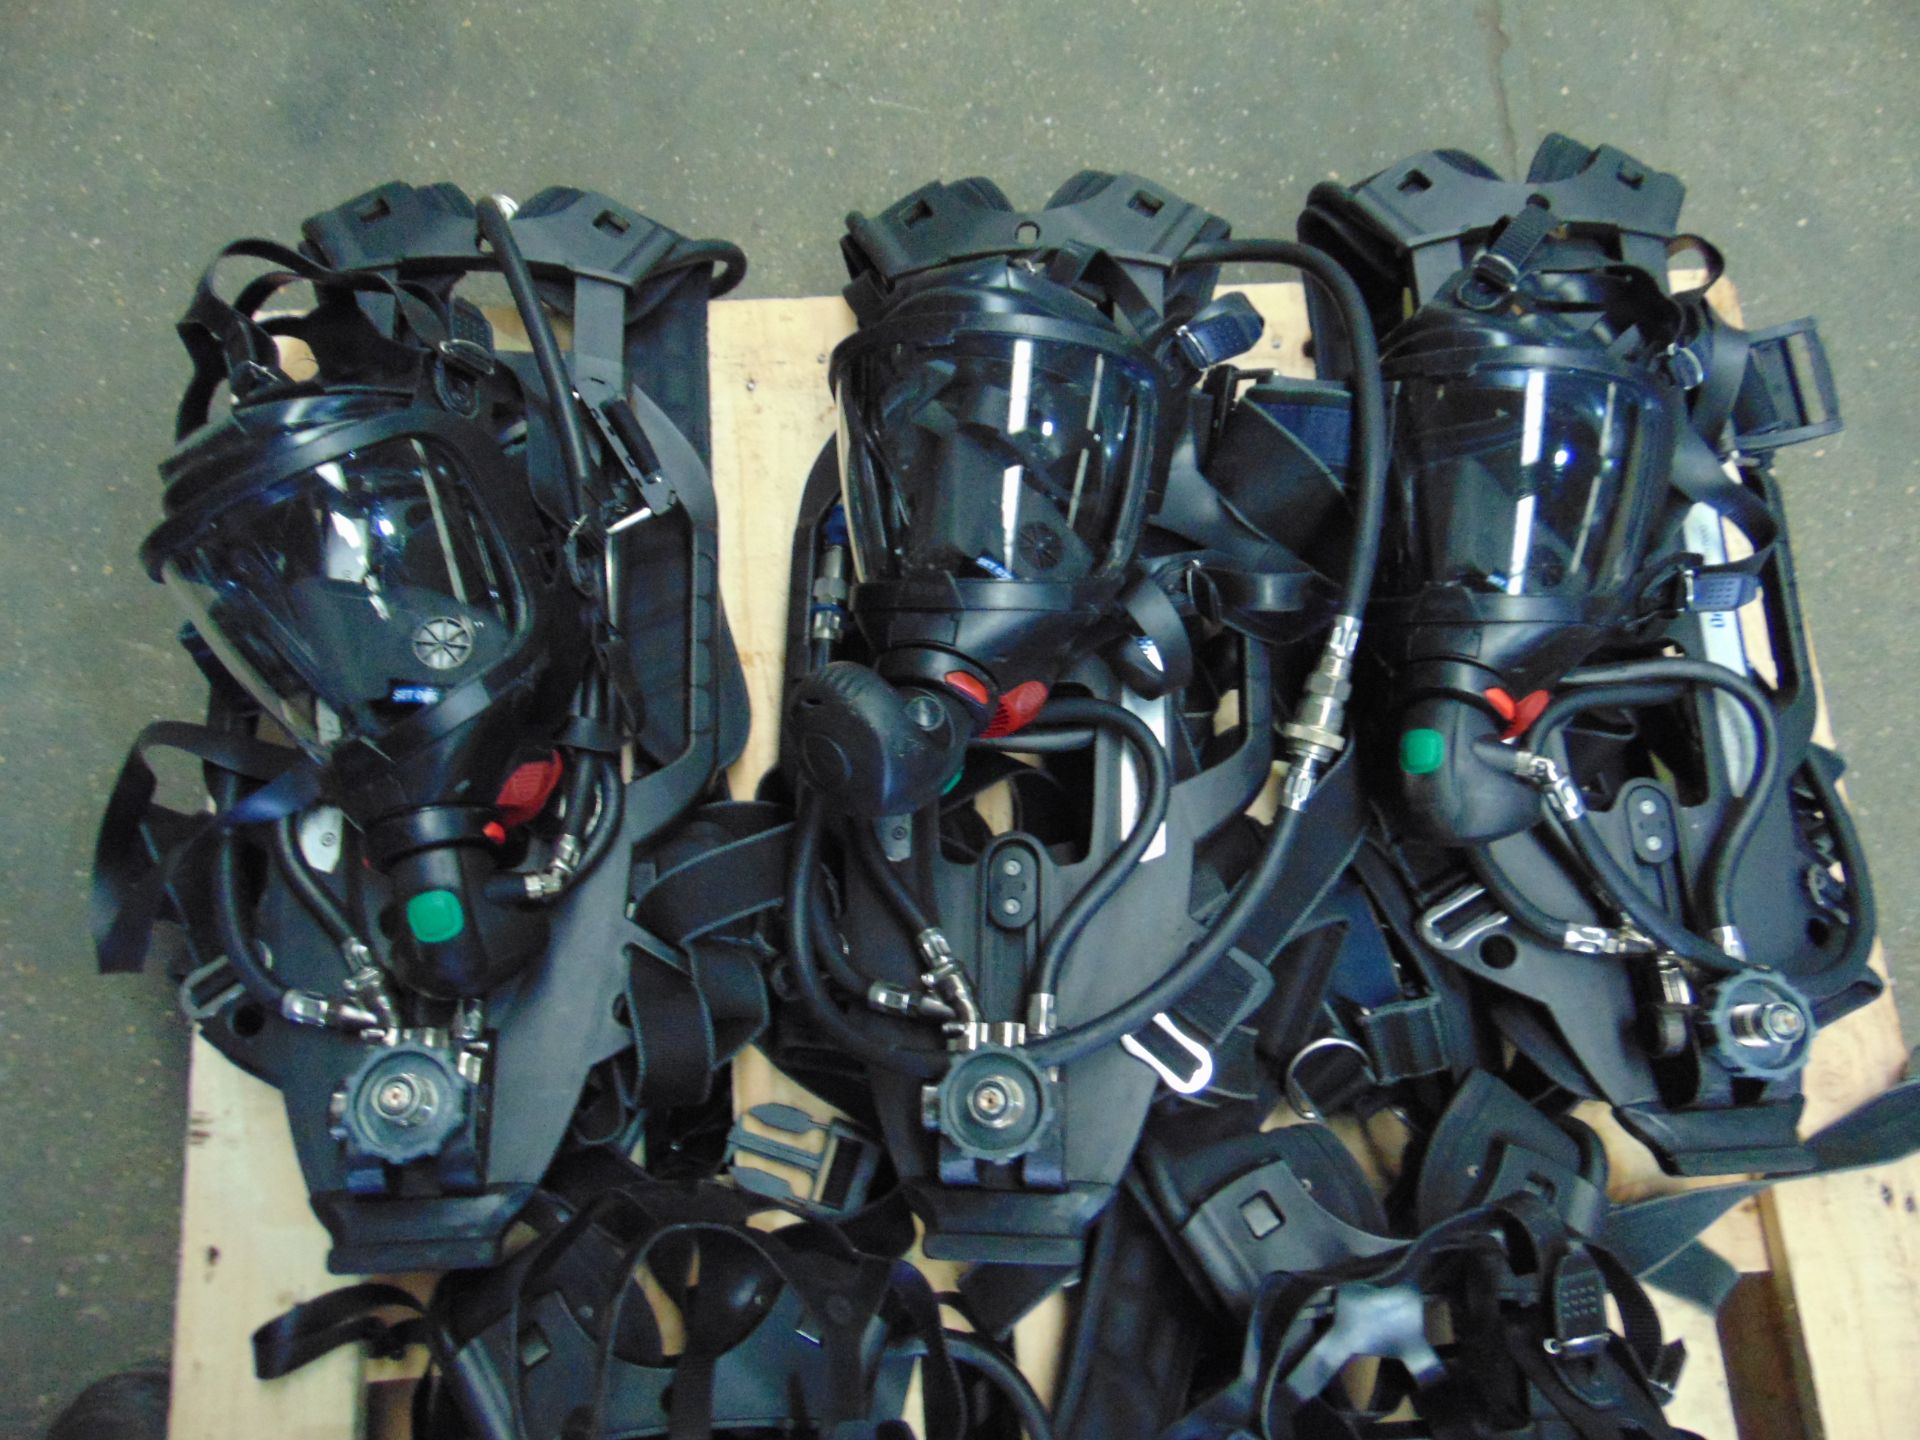 5 x Drager PSS 7000 Self Contained Breathing Apparatus w/ 10 x Drager 300 Bar Air Cylinders - Image 8 of 22